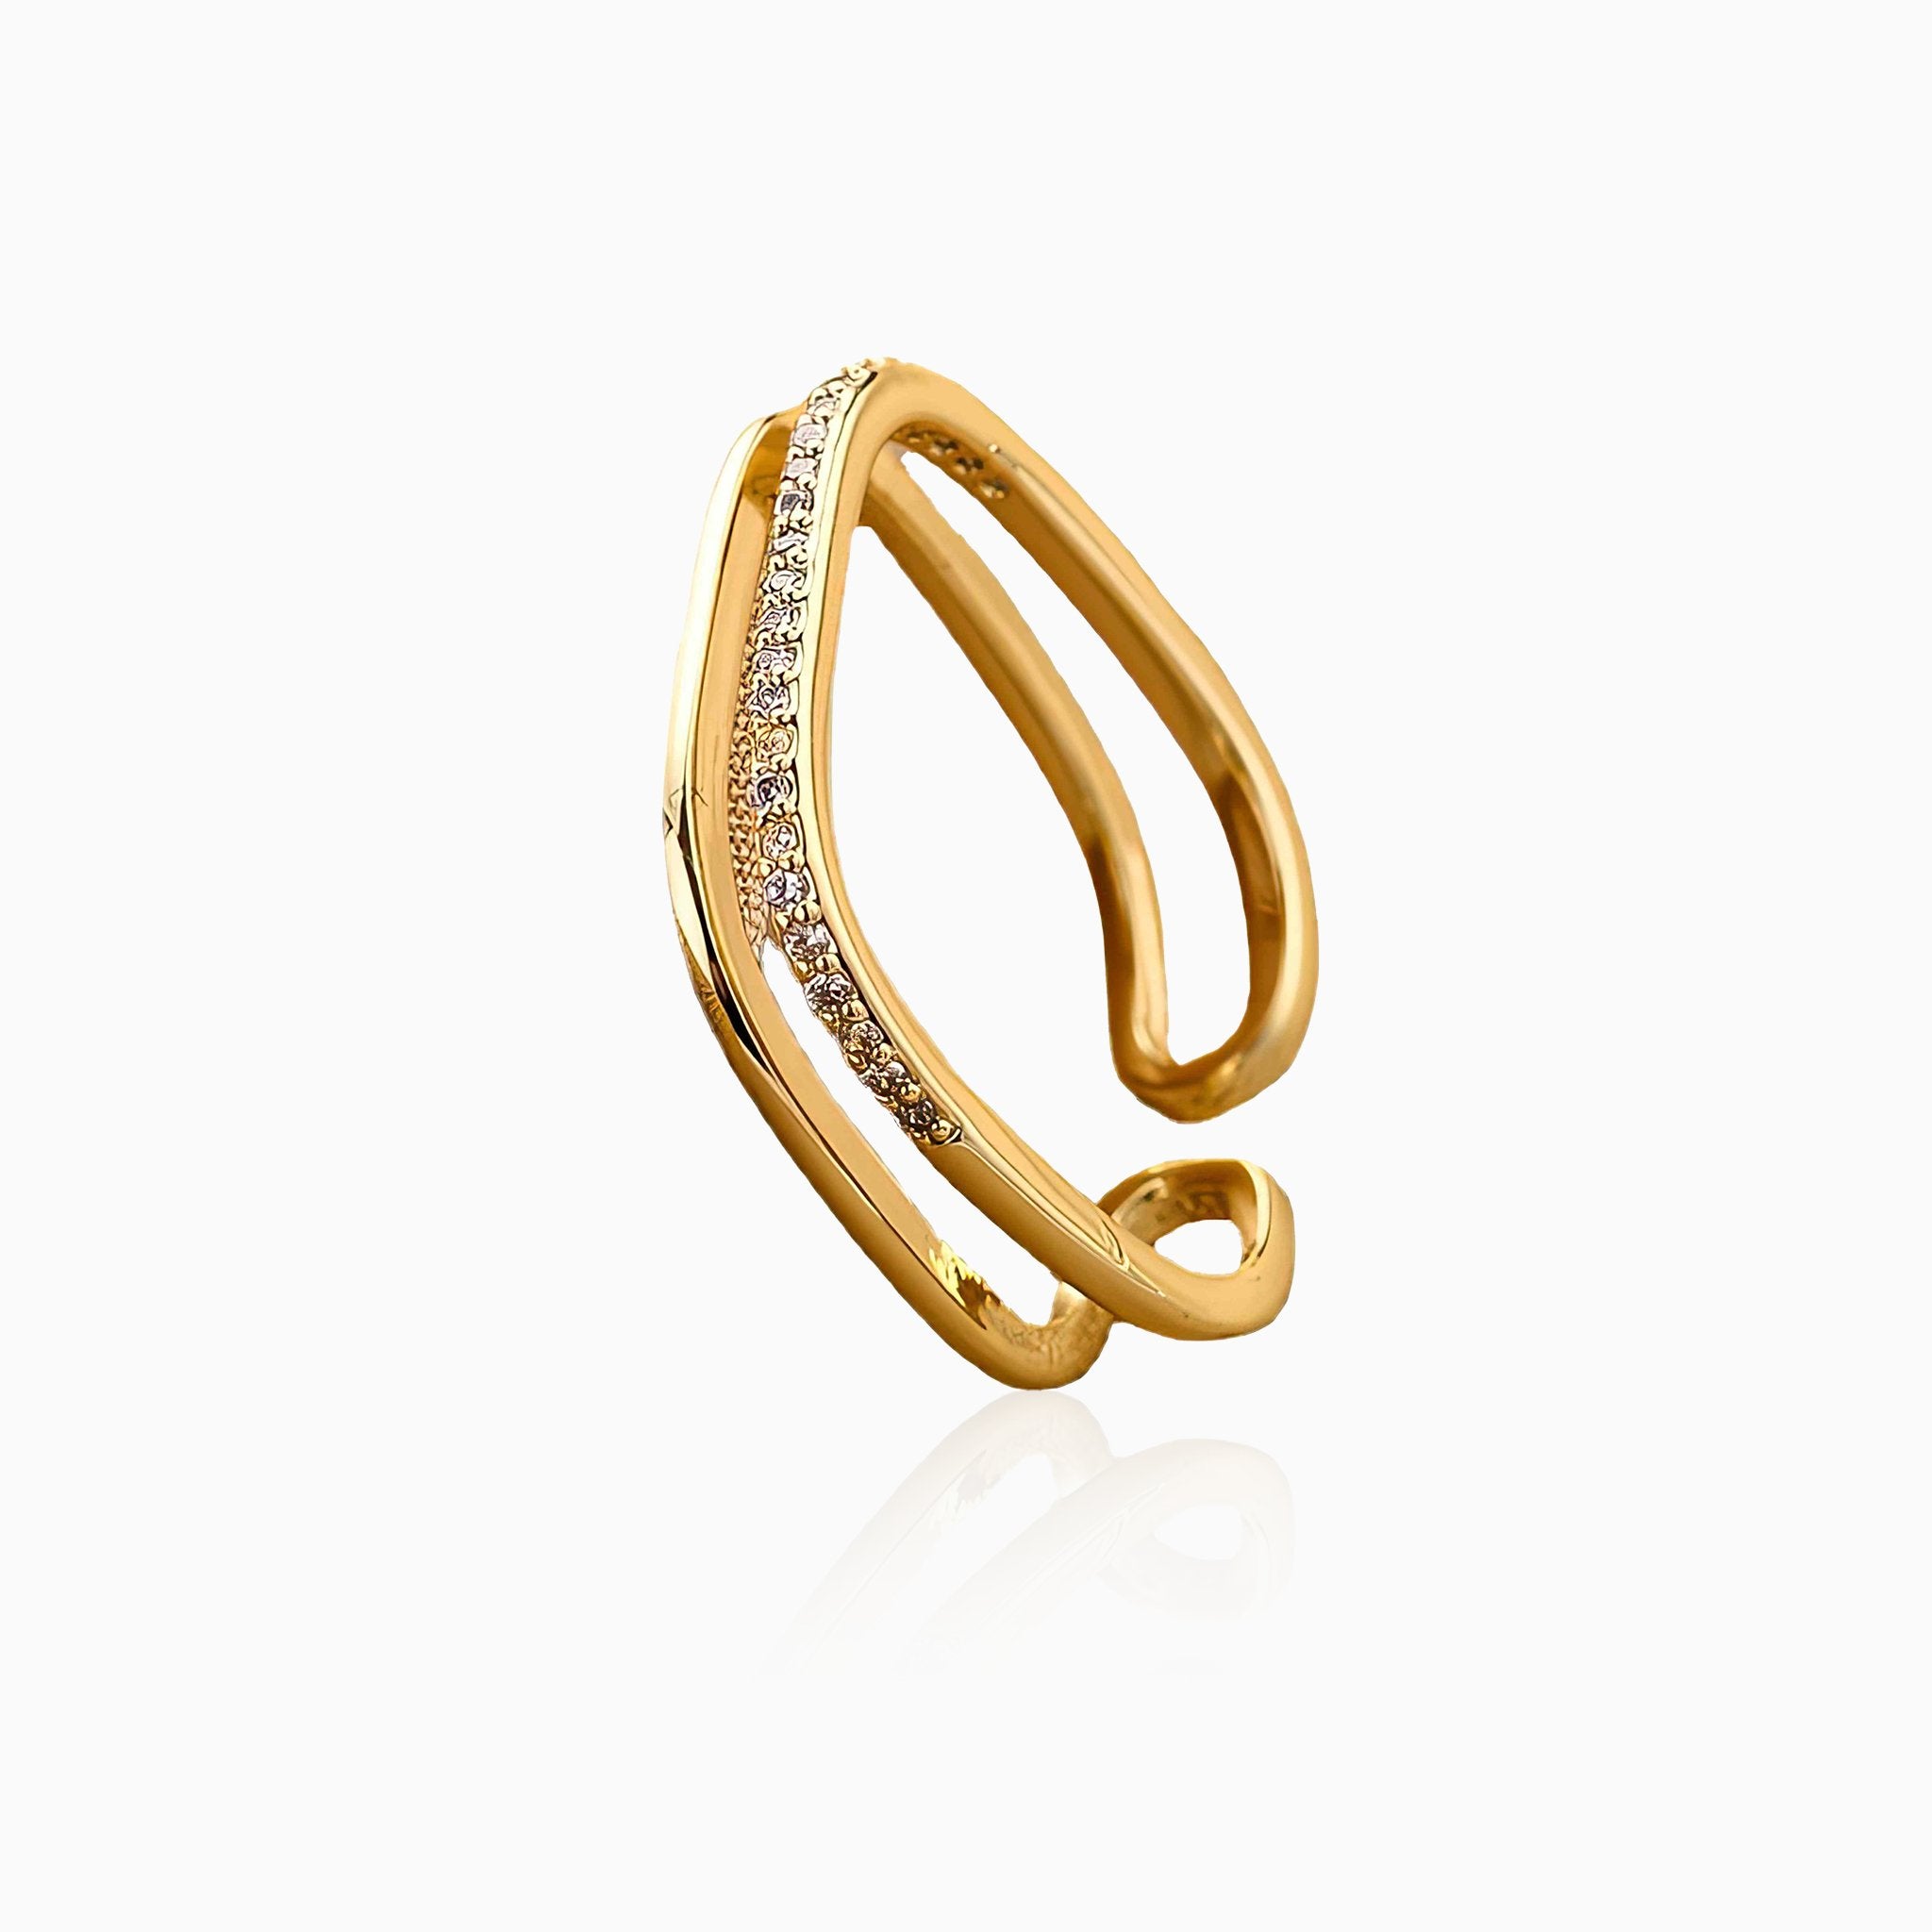 Square Open Ring - Nobbier - Ring - 18K Gold And Titanium PVD Coated Jewelry